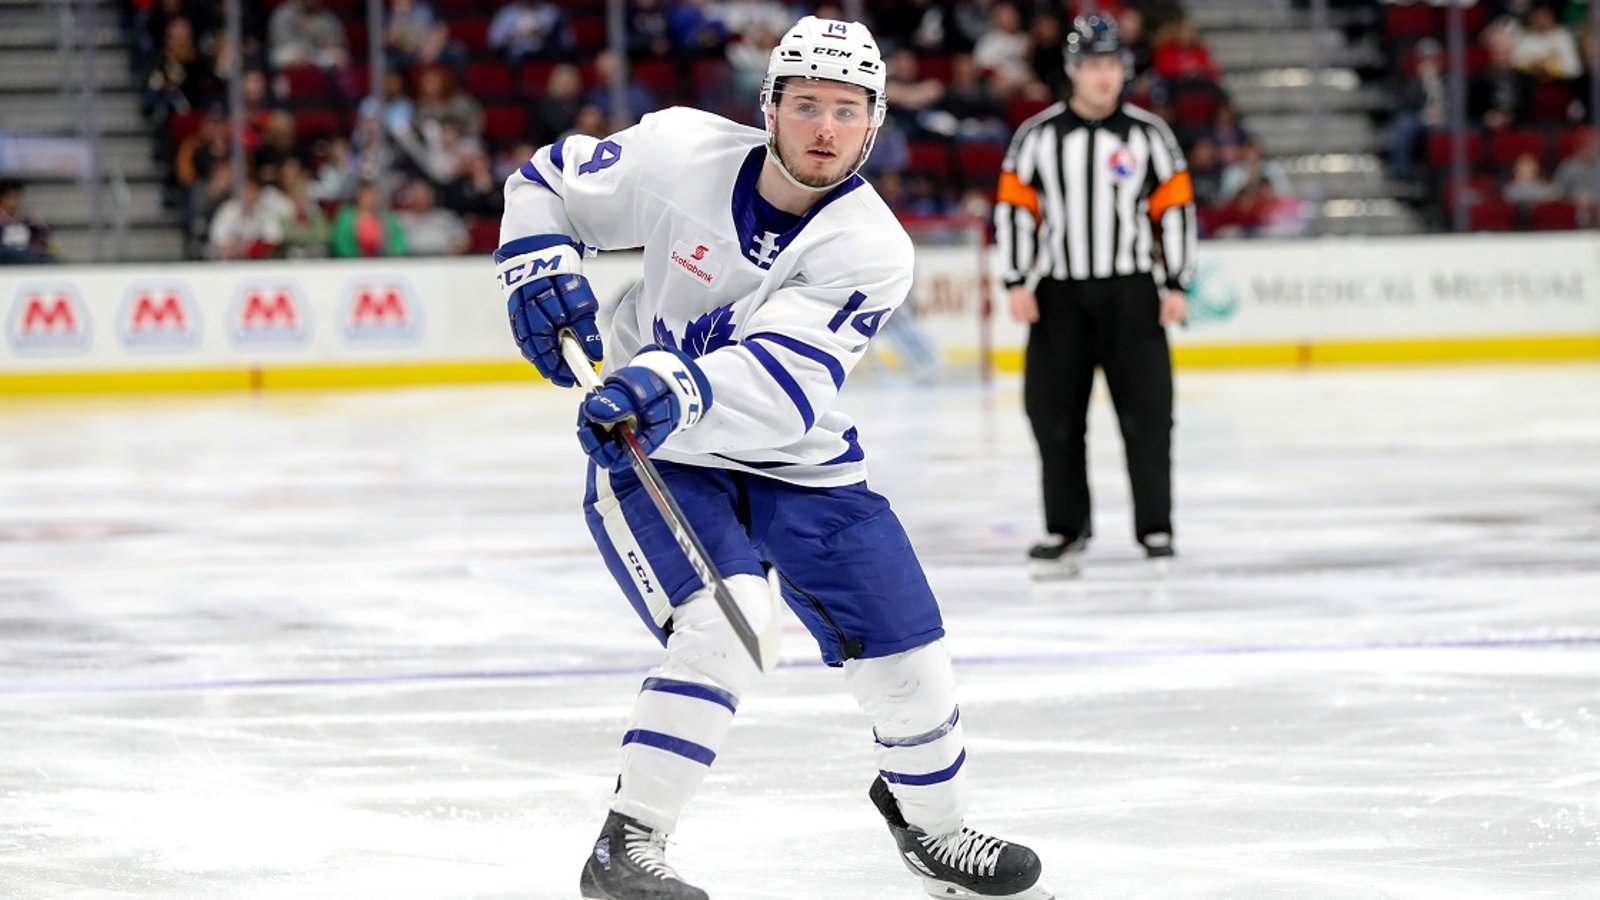 Leafs forced to make multiple lineup changes due to injury.